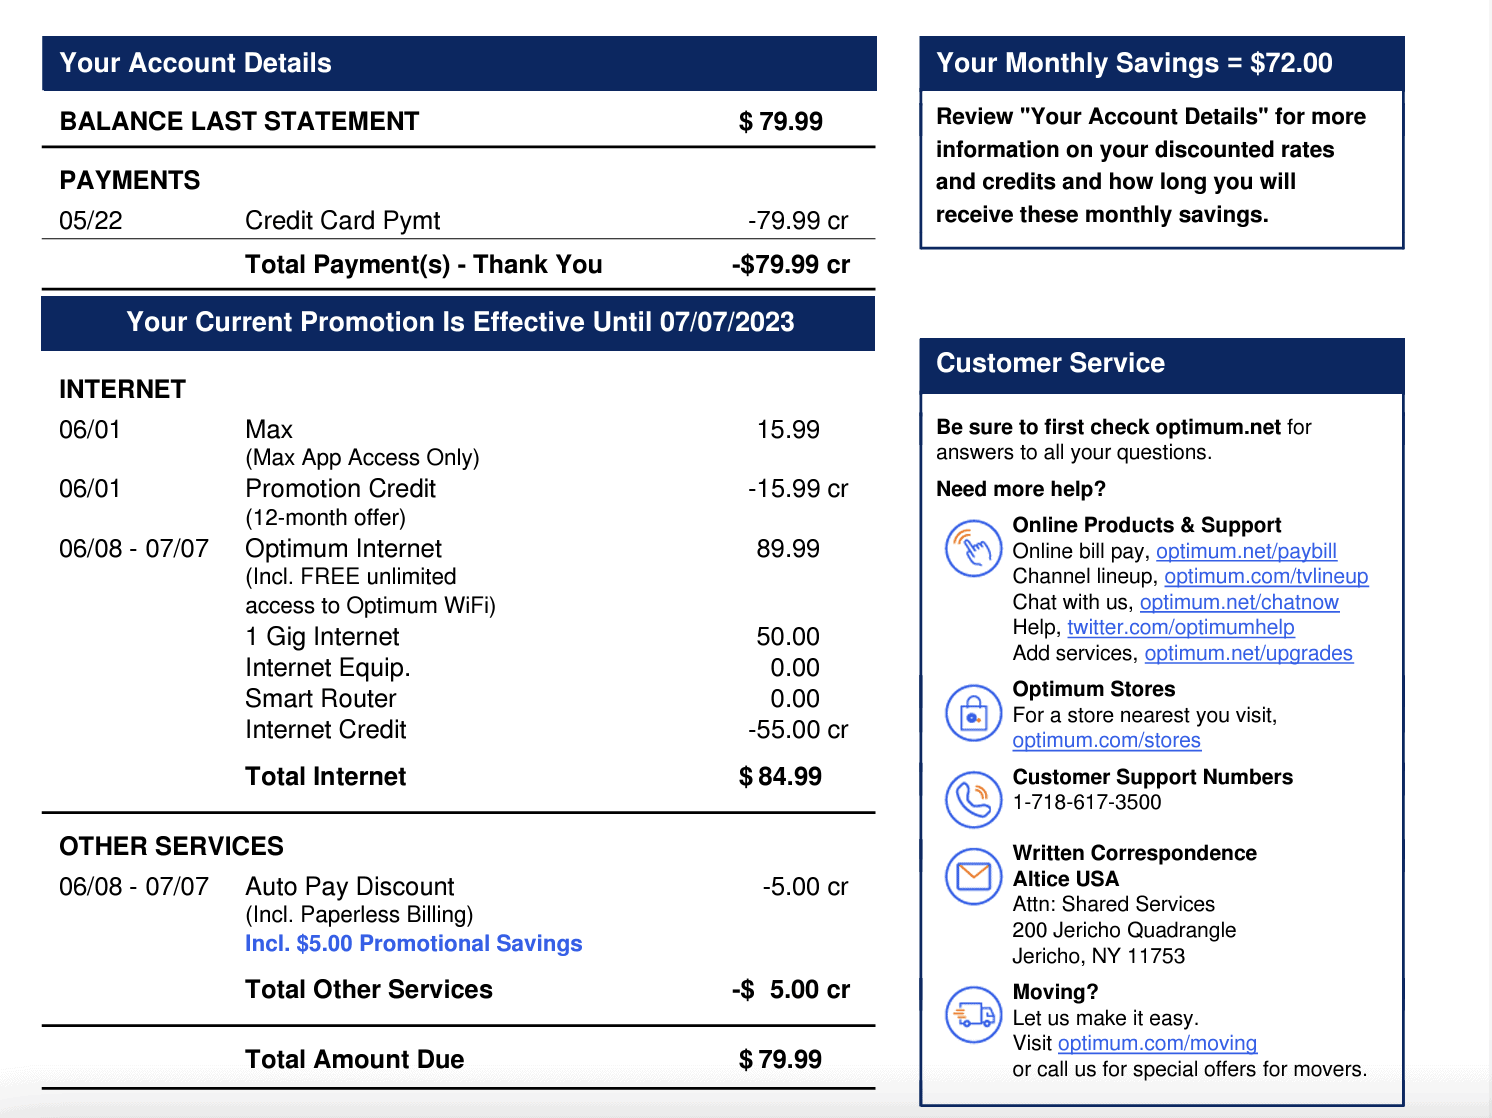 As you can see, my monthly bill from Optimum contained few surprise fees.